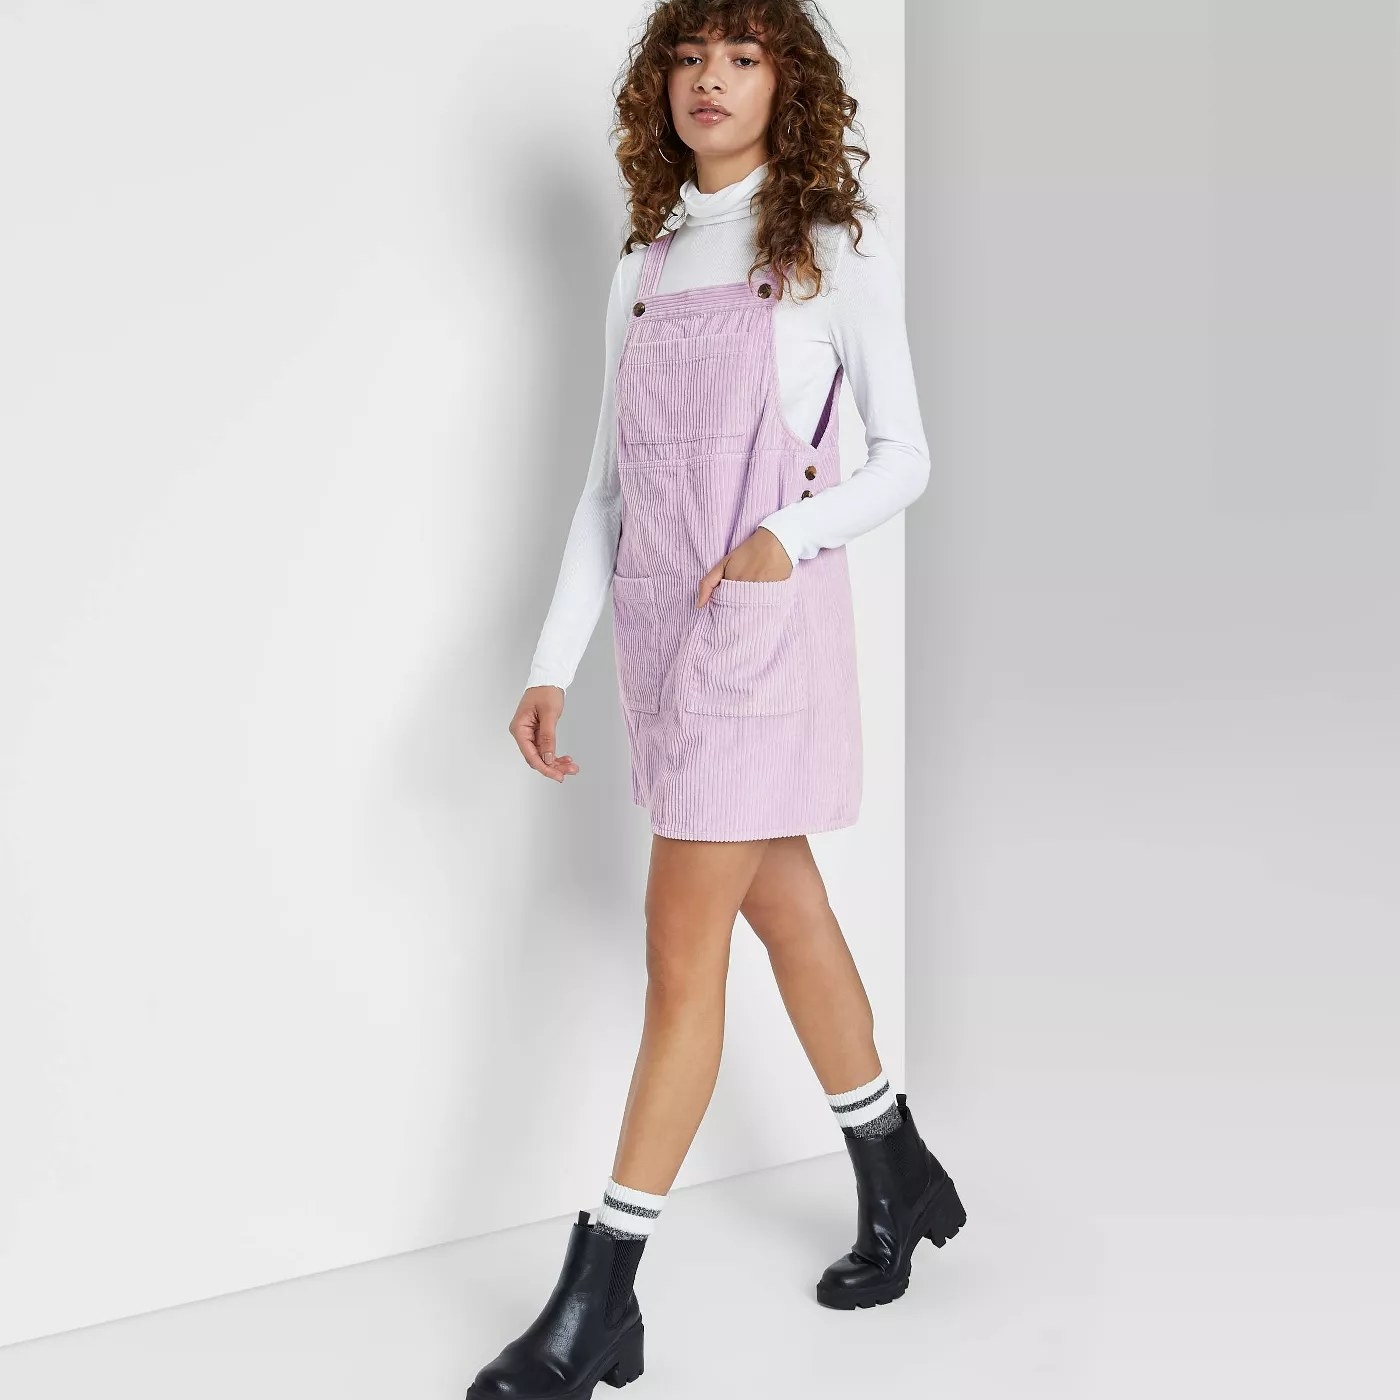 model wears lilac jumper over a white turtleneck and black booties